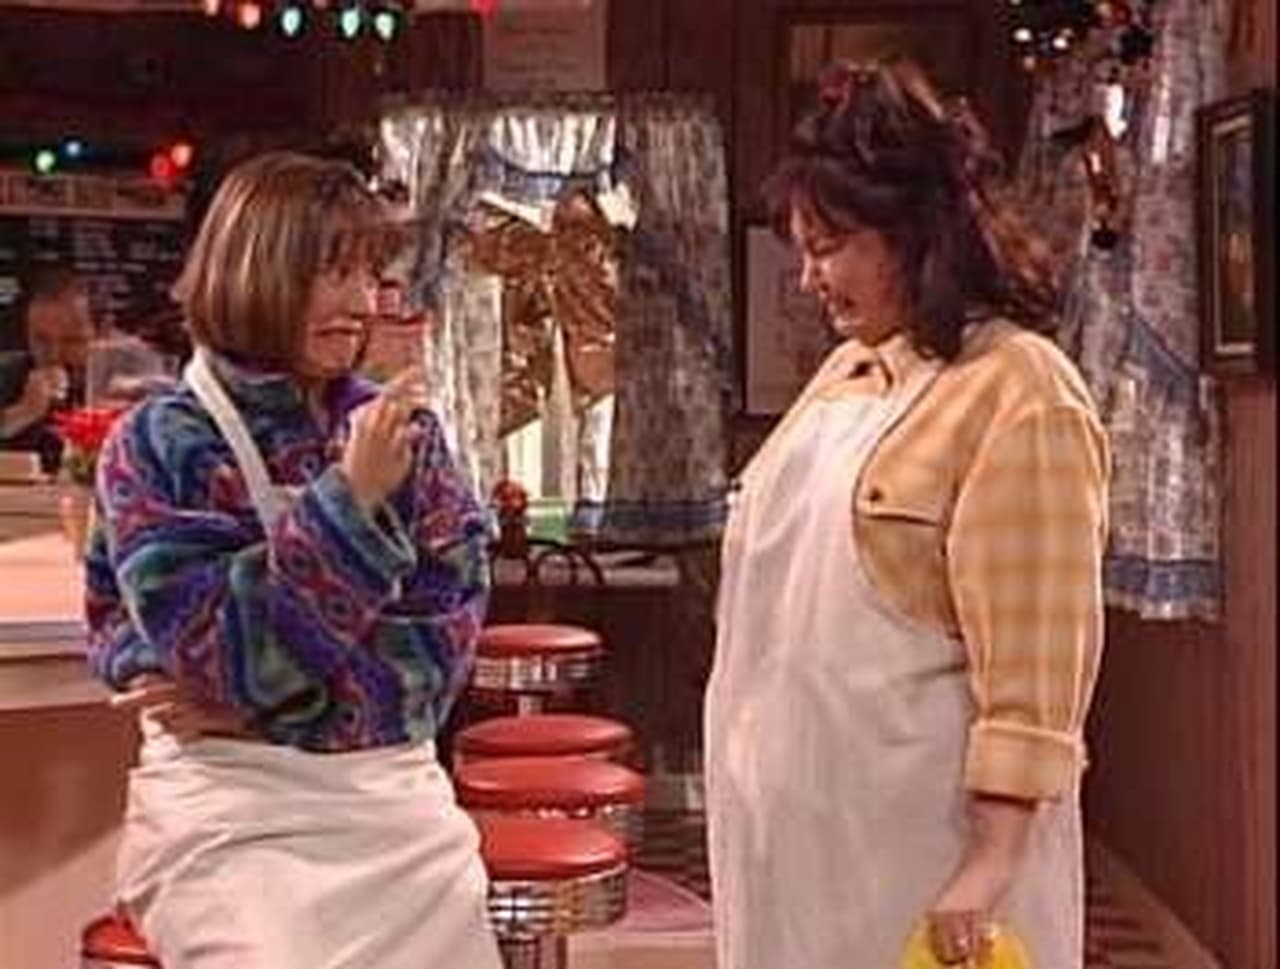 Roseanne - Season 5 Episode 12 : It's No Place Like Home for The Holidays